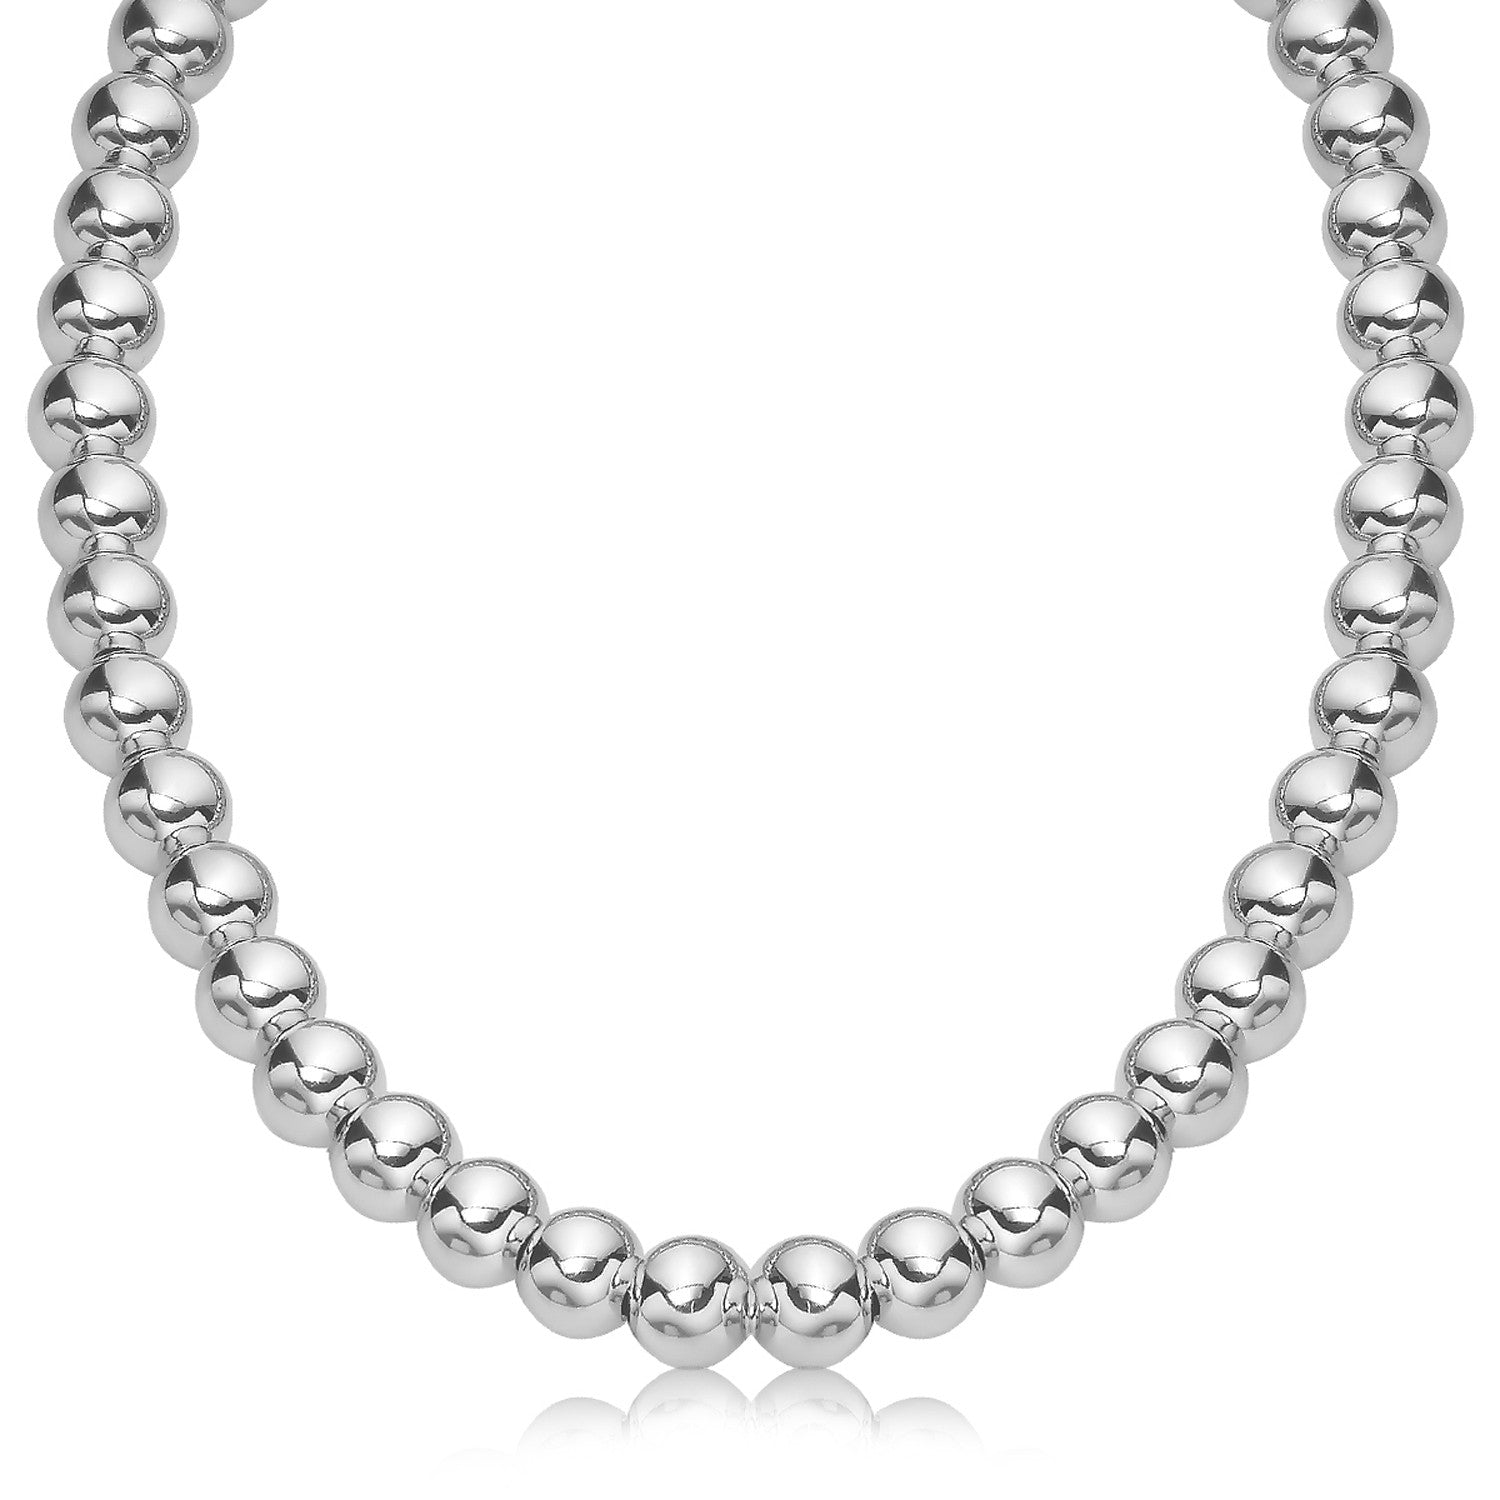 Sterling Silver Polished Bead Necklace with Rhodium Plating (10mm)